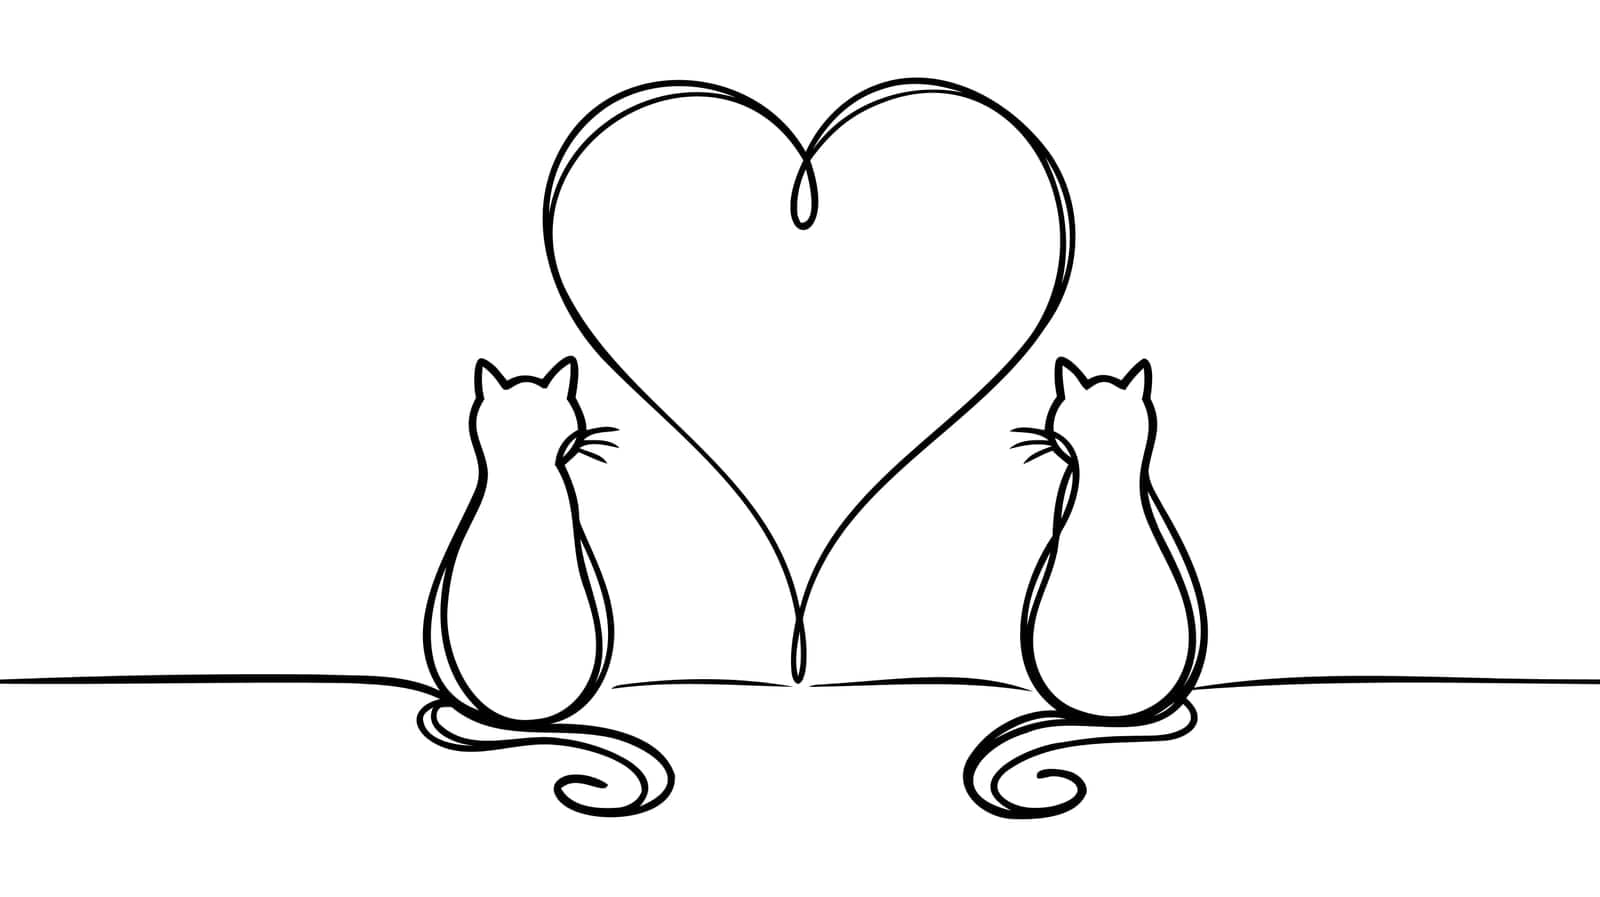 One line continuous cats and heart symbol. Line art love banner concept. Hand drawn, outline vector illustration.